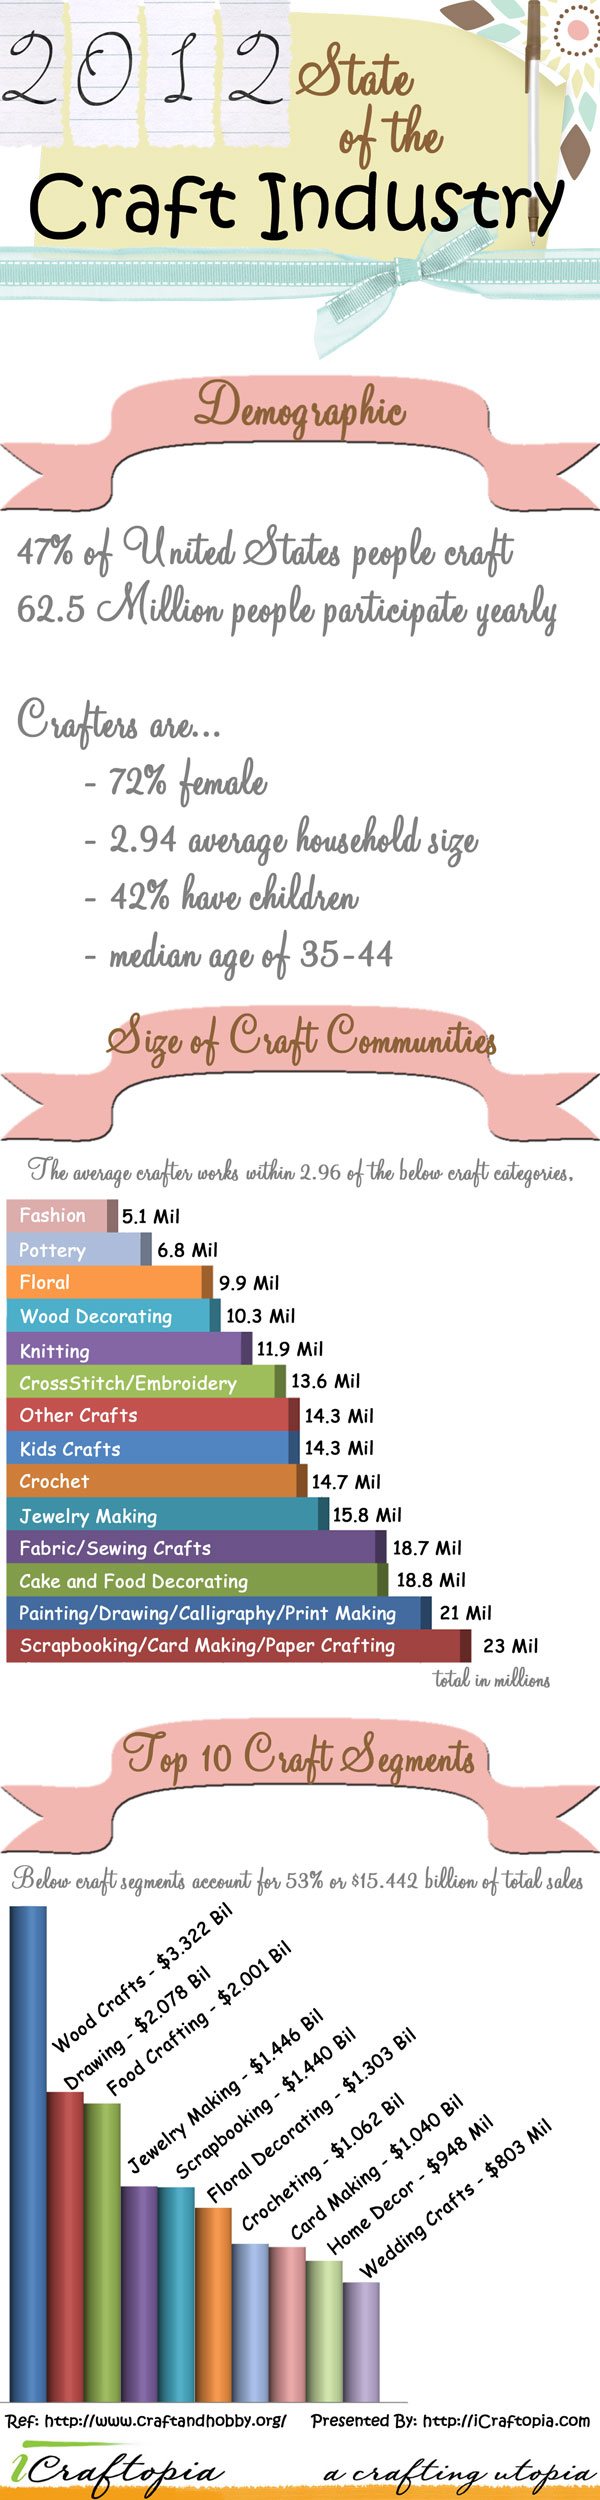 2012 State of the Craft Industry